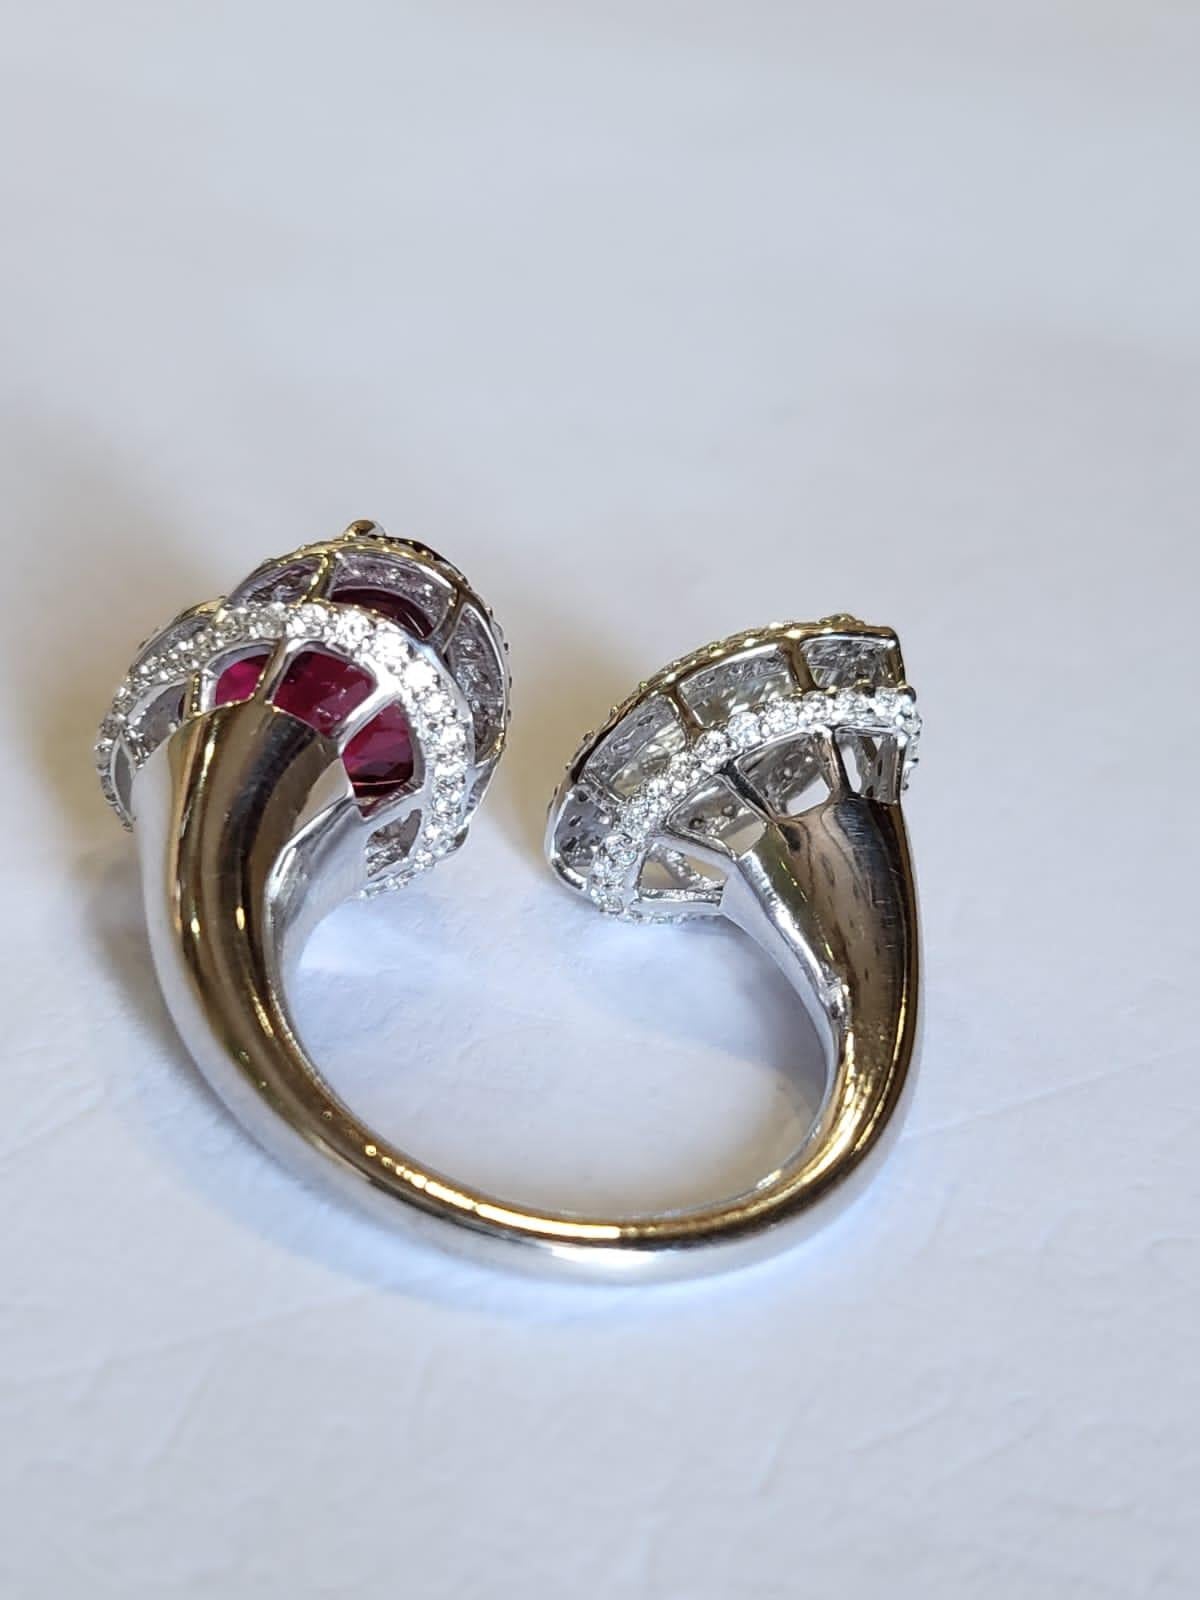 Marquise Cut Set in 18K Gold, 4.36 Carats Rubellite & 1.05 Carats Diamond Engagement Ring